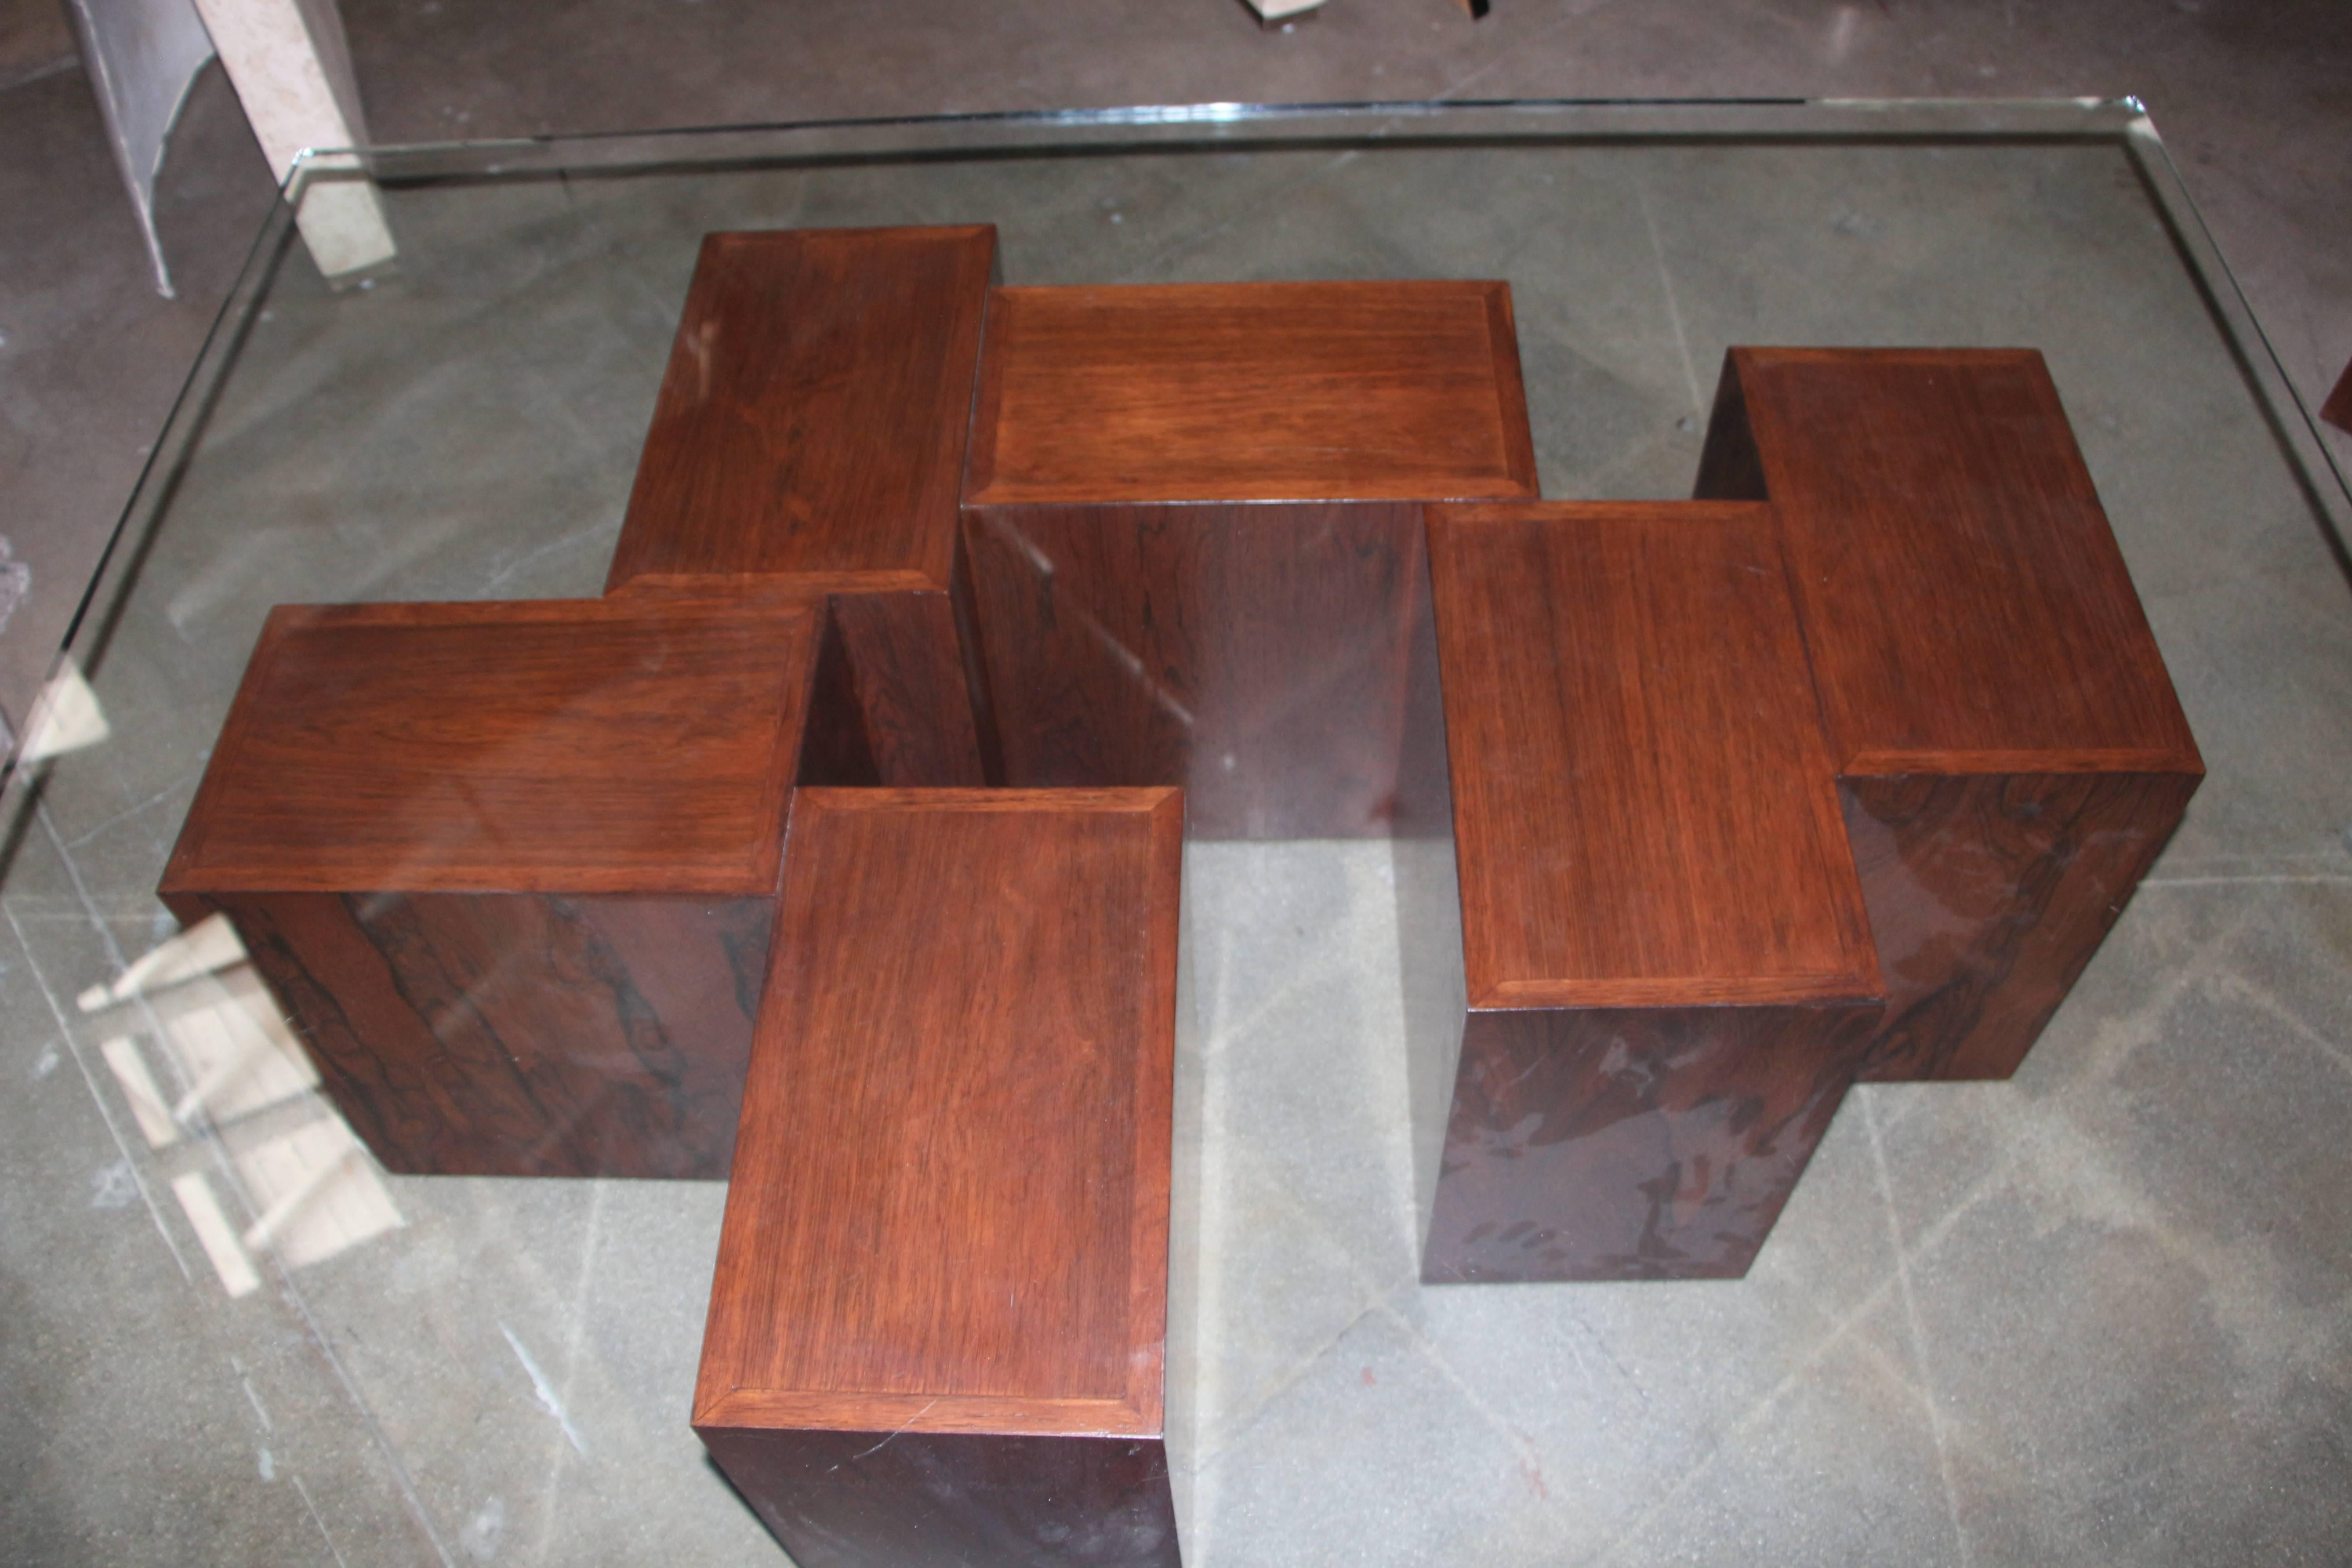 Stunning Rosewood Cube Coffee Table with Glass Top 1